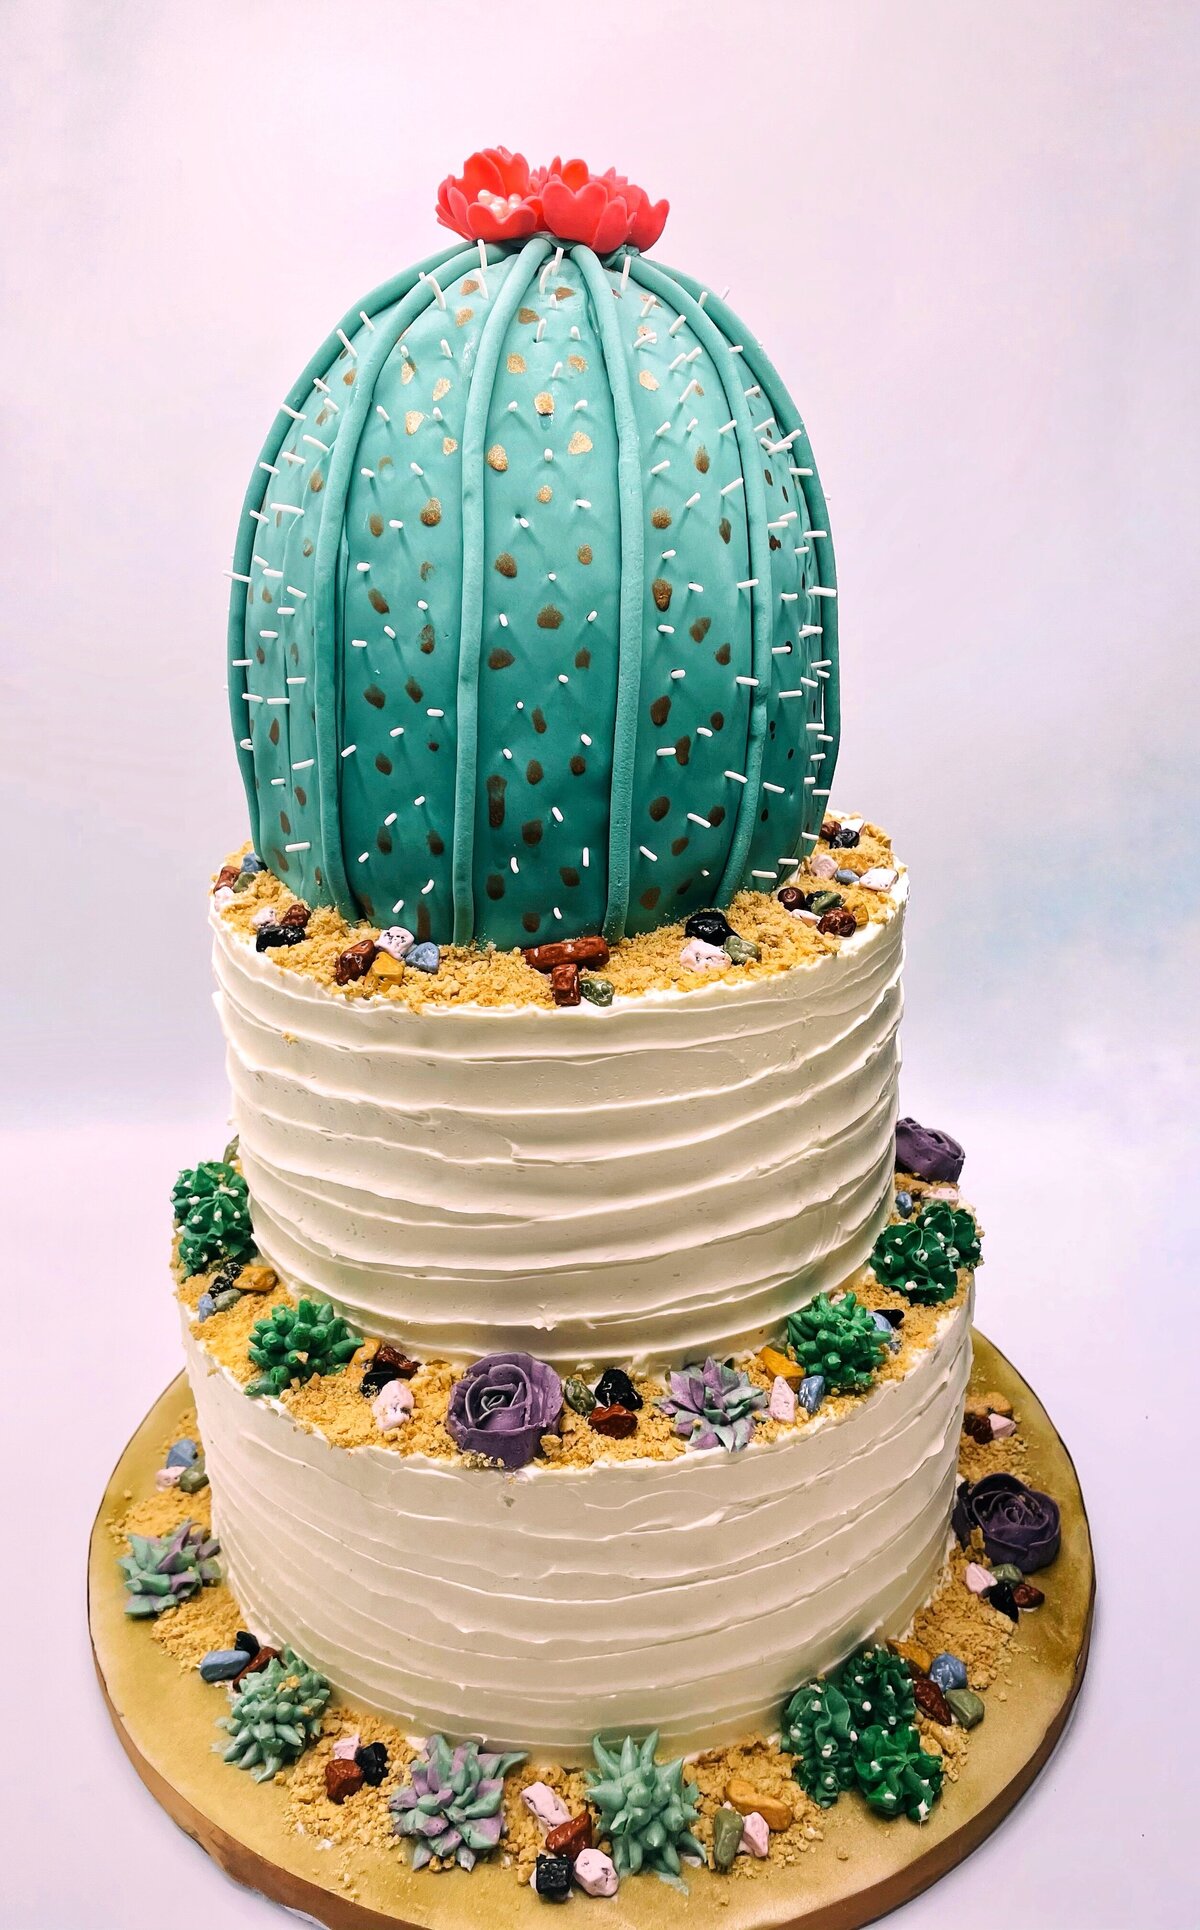 Desert theme 3 tier wedding cake. Middle and bottom tiers are wavy buttercream design surrounded by handcrafted succulents. Top tier is carved barrel cactus covered in hand-painted fondant with red cactus flower